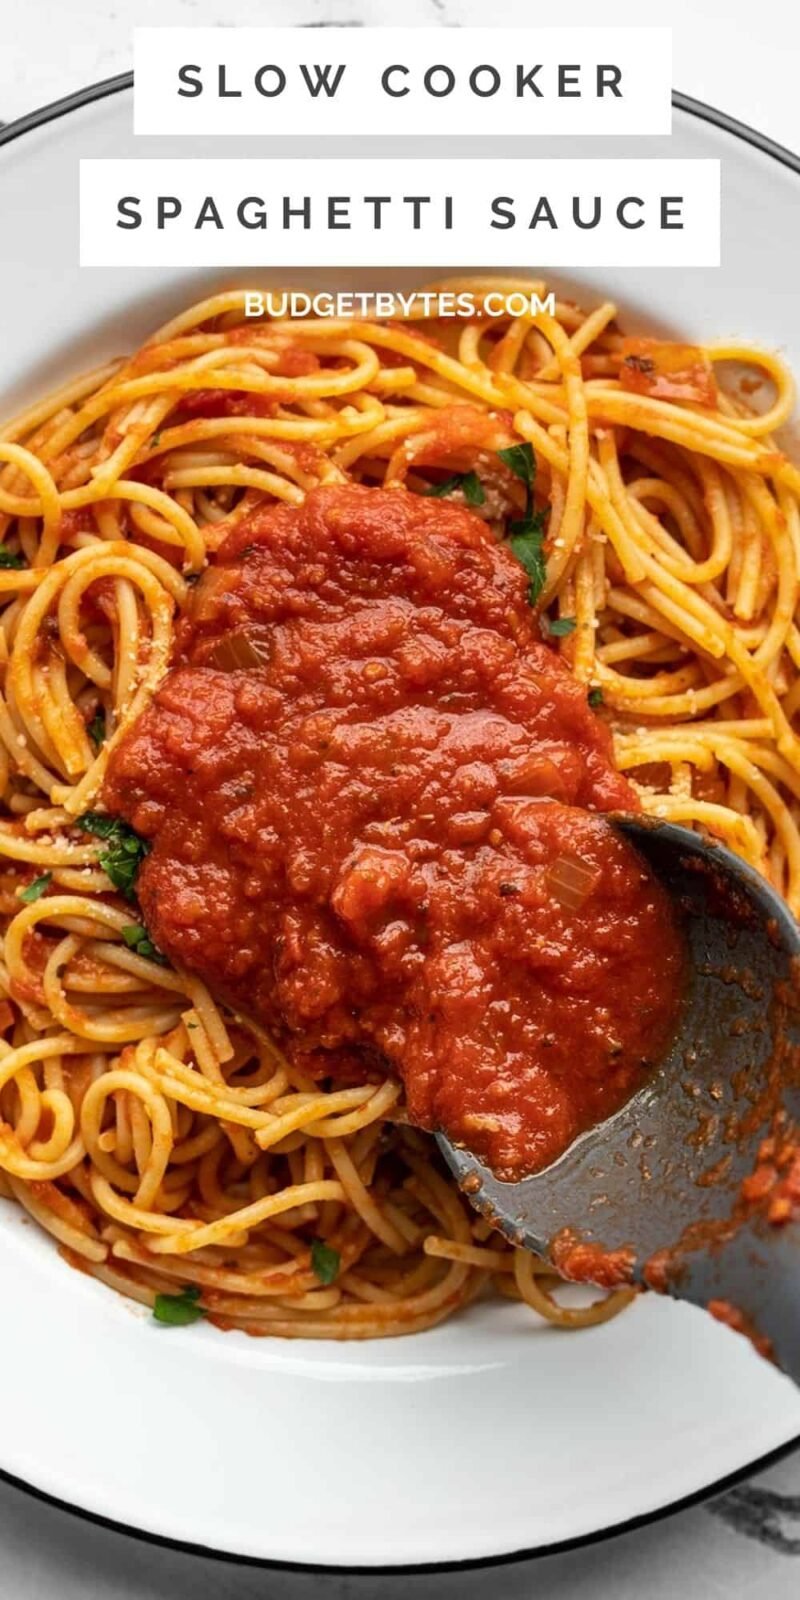 Spaghetti sauce being spooned over a plate of spaghetti, title text at the top